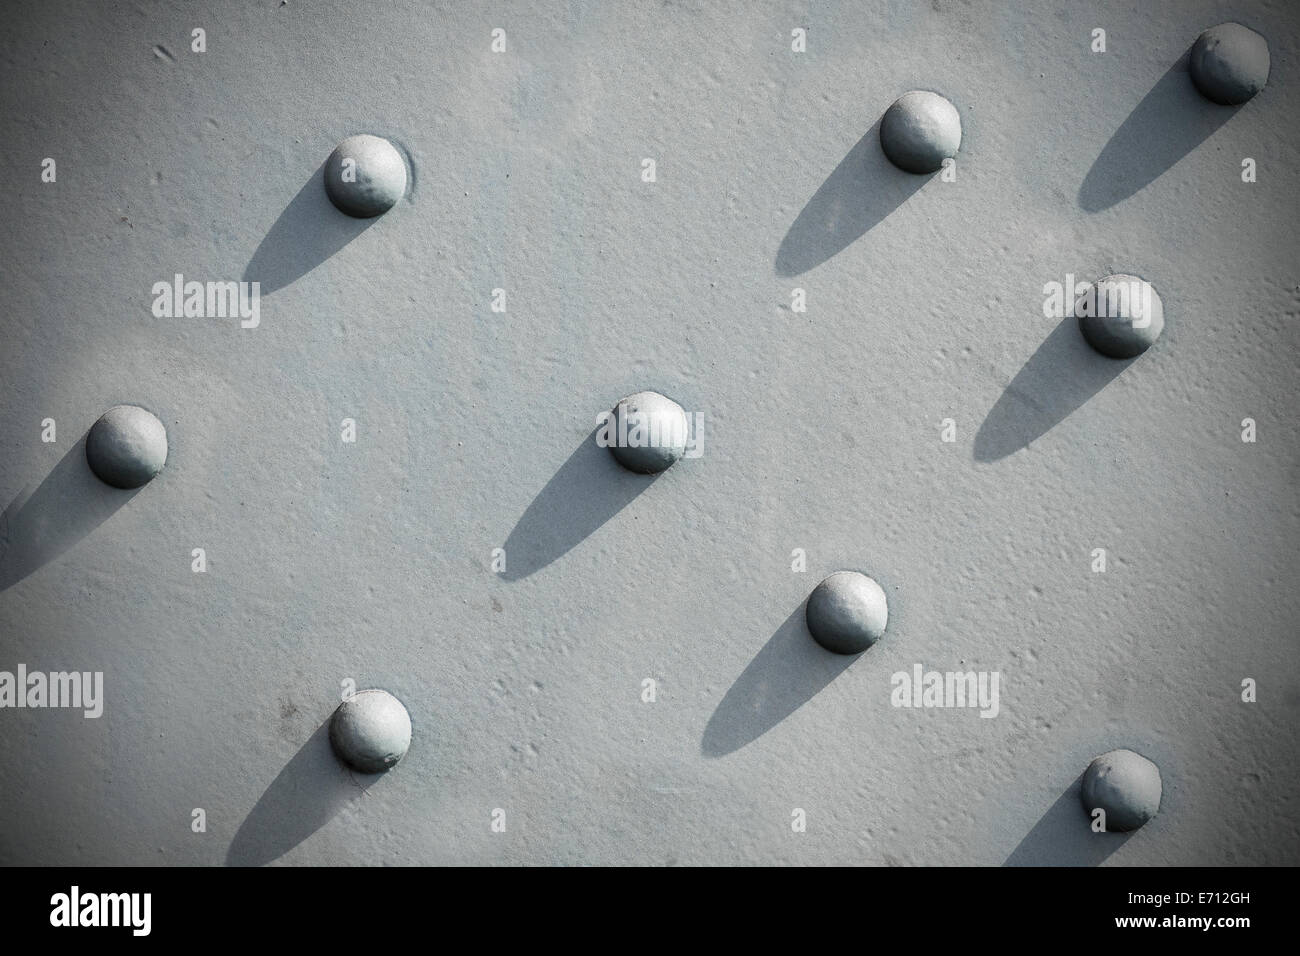 Abstract gray background, riveted metal textured. Stock Photo